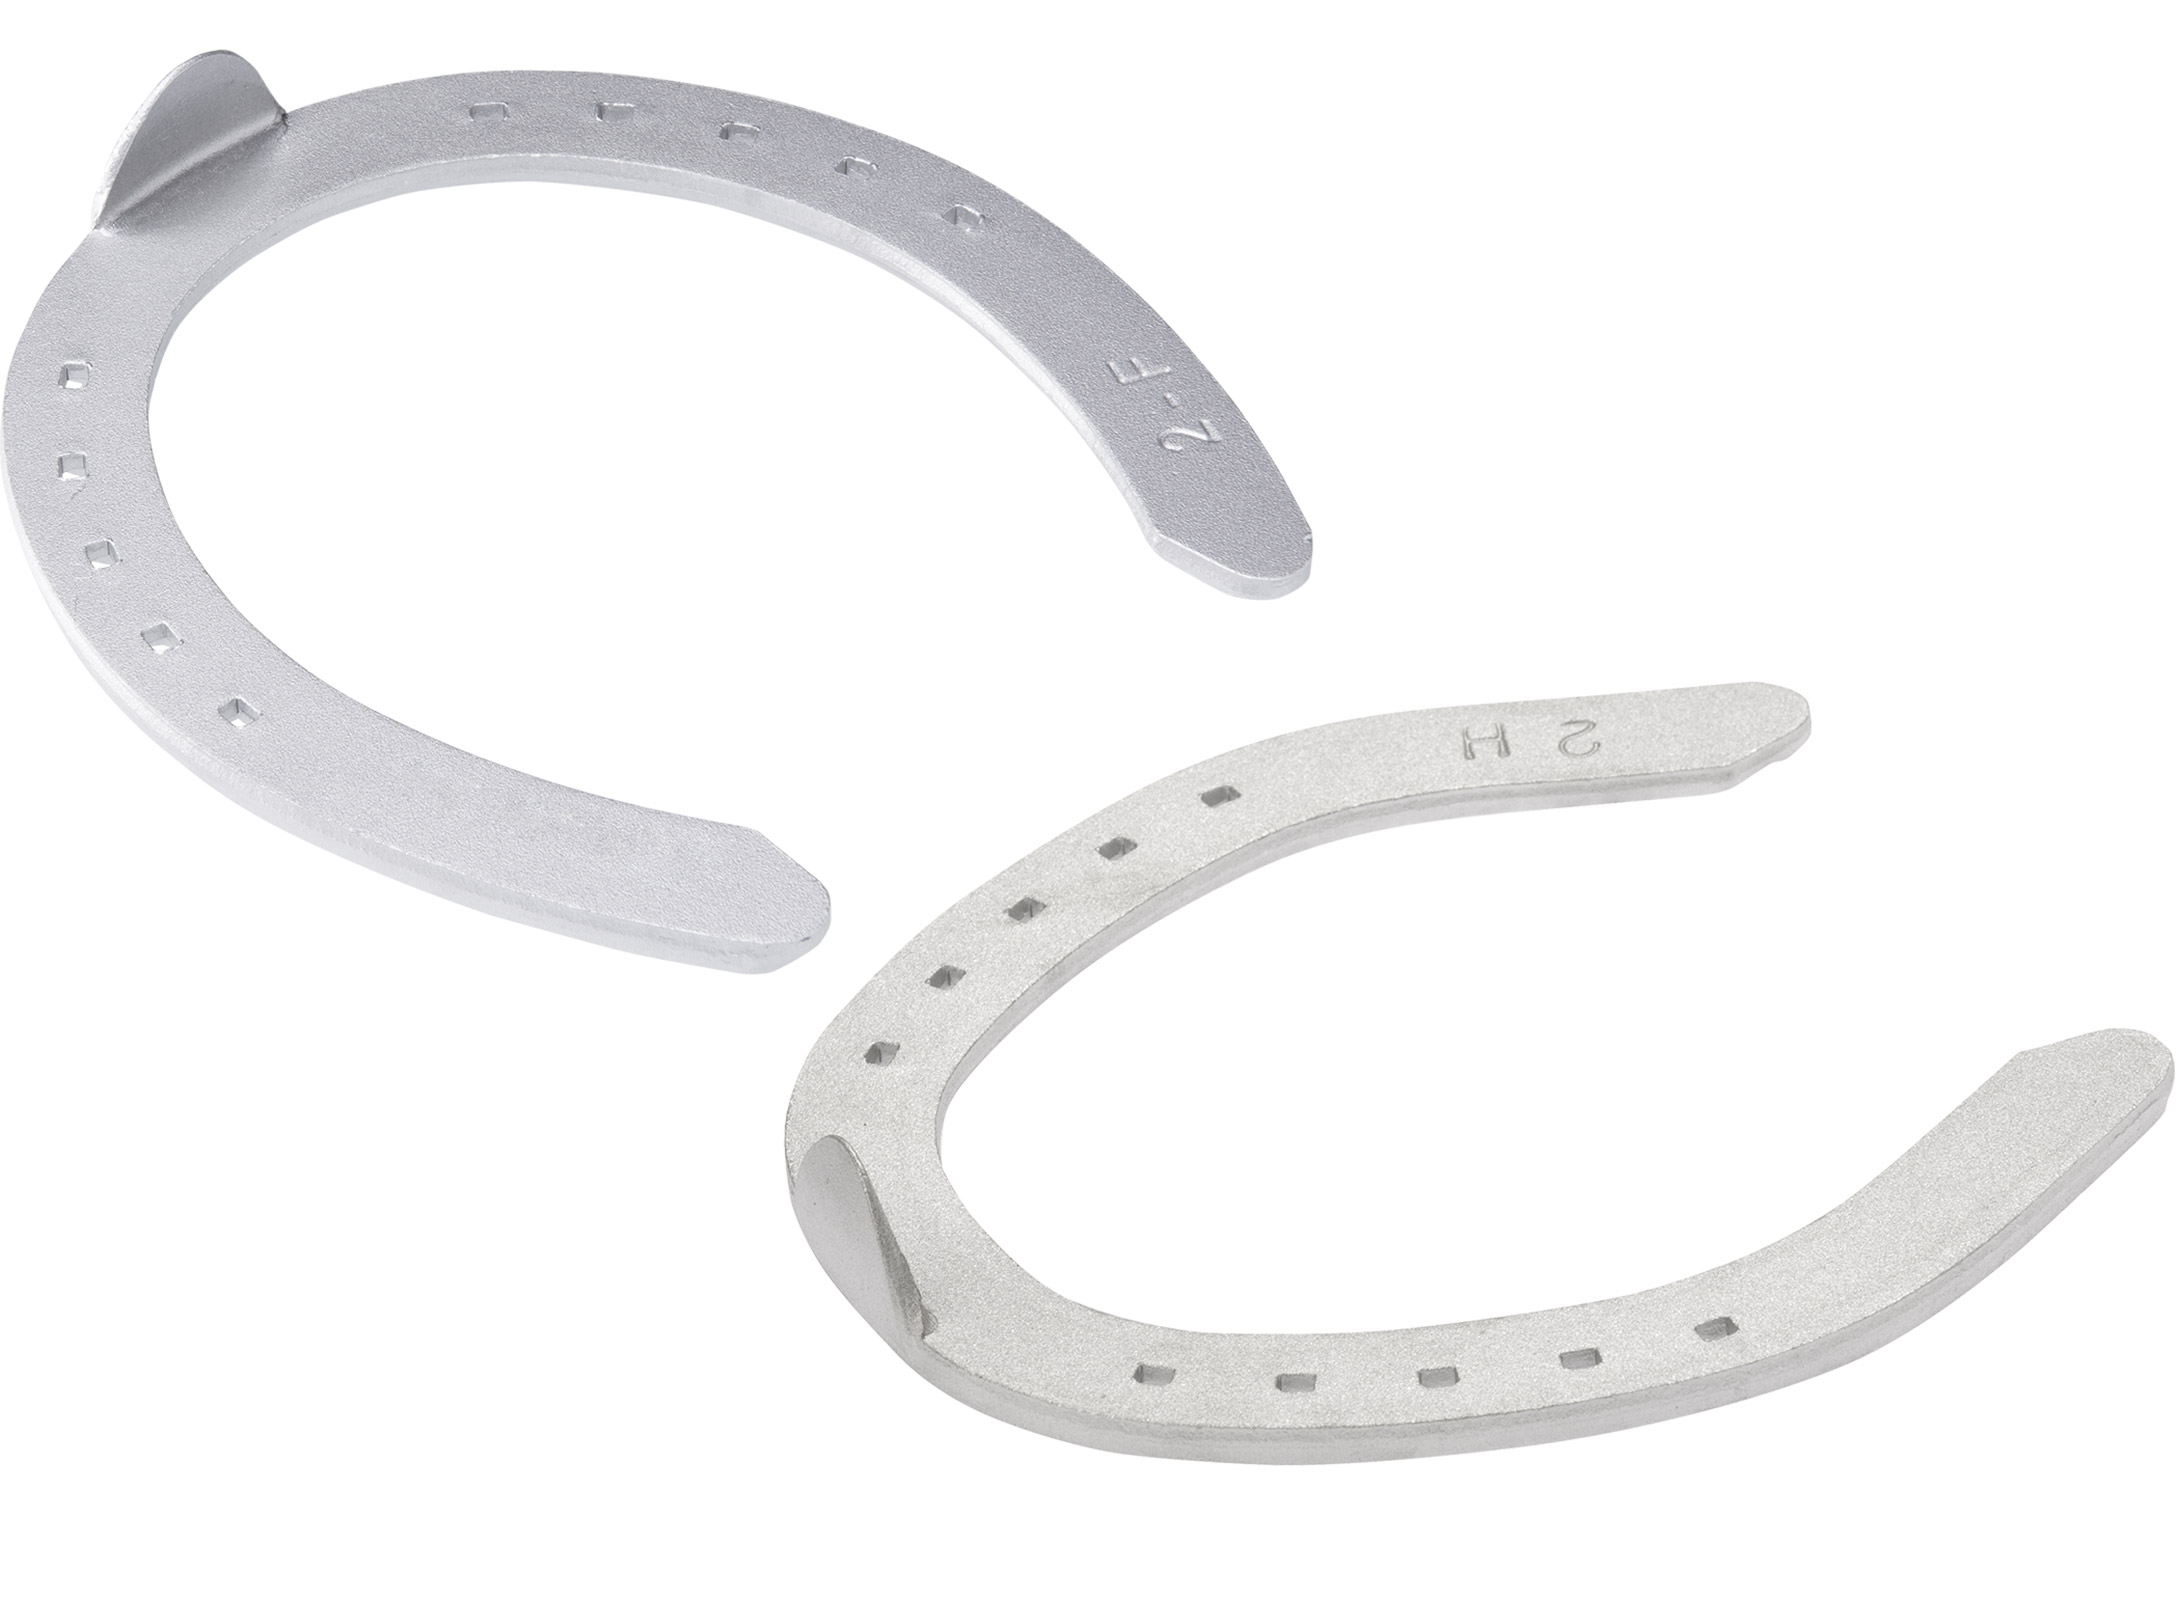 St. Croix Ultra Lite Aluminium horseshoes, front and hind, hoof side view